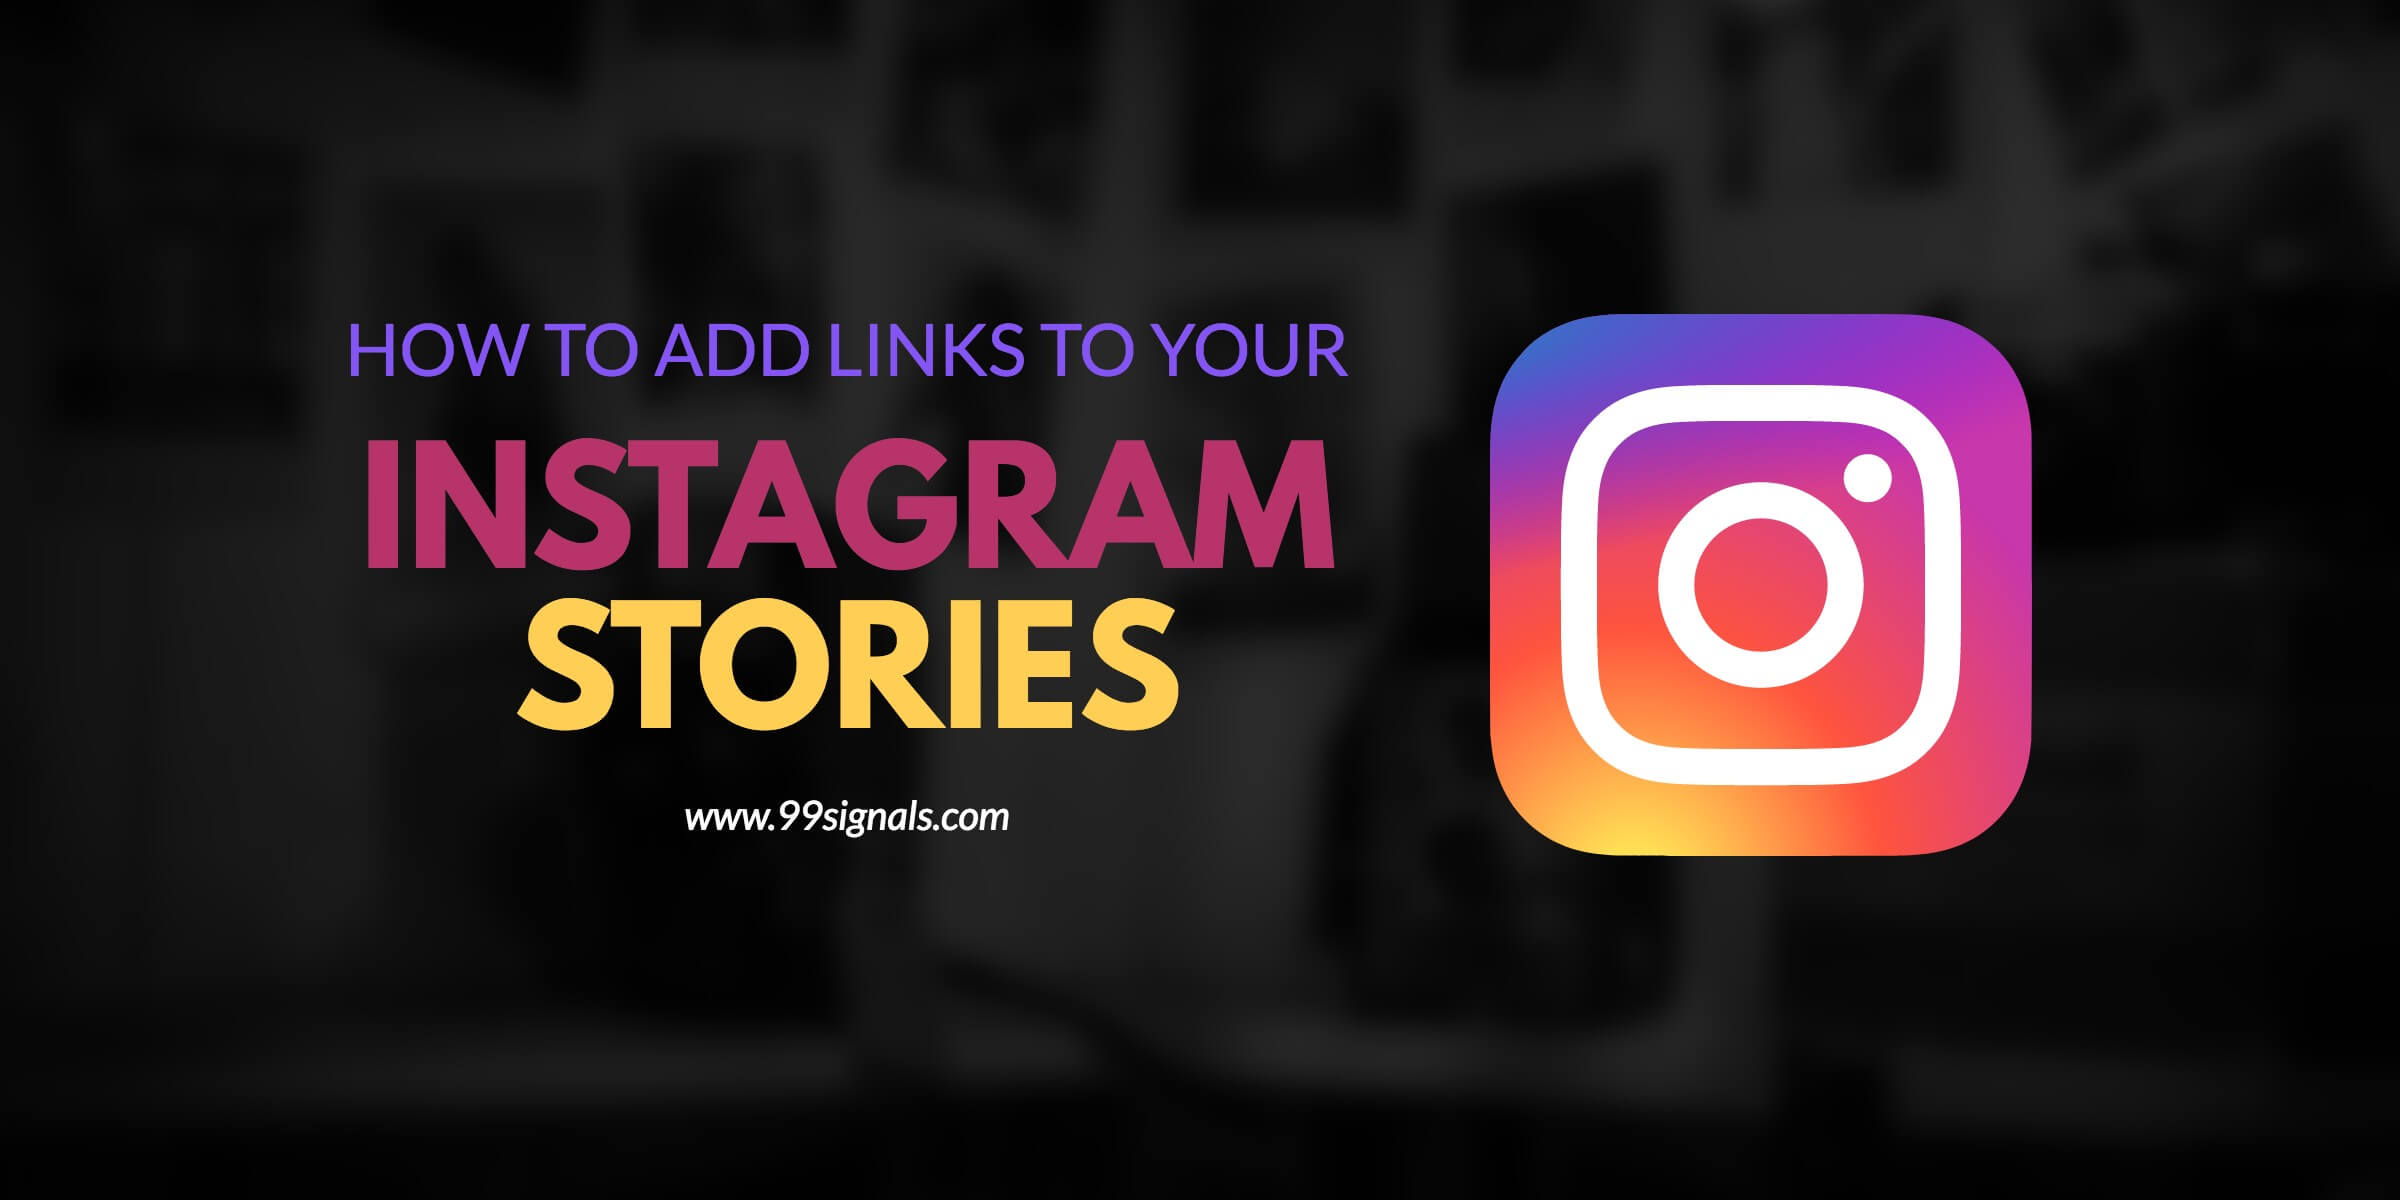 How to Add Links to Your Instagram Stories to Drive Traffic and Sales